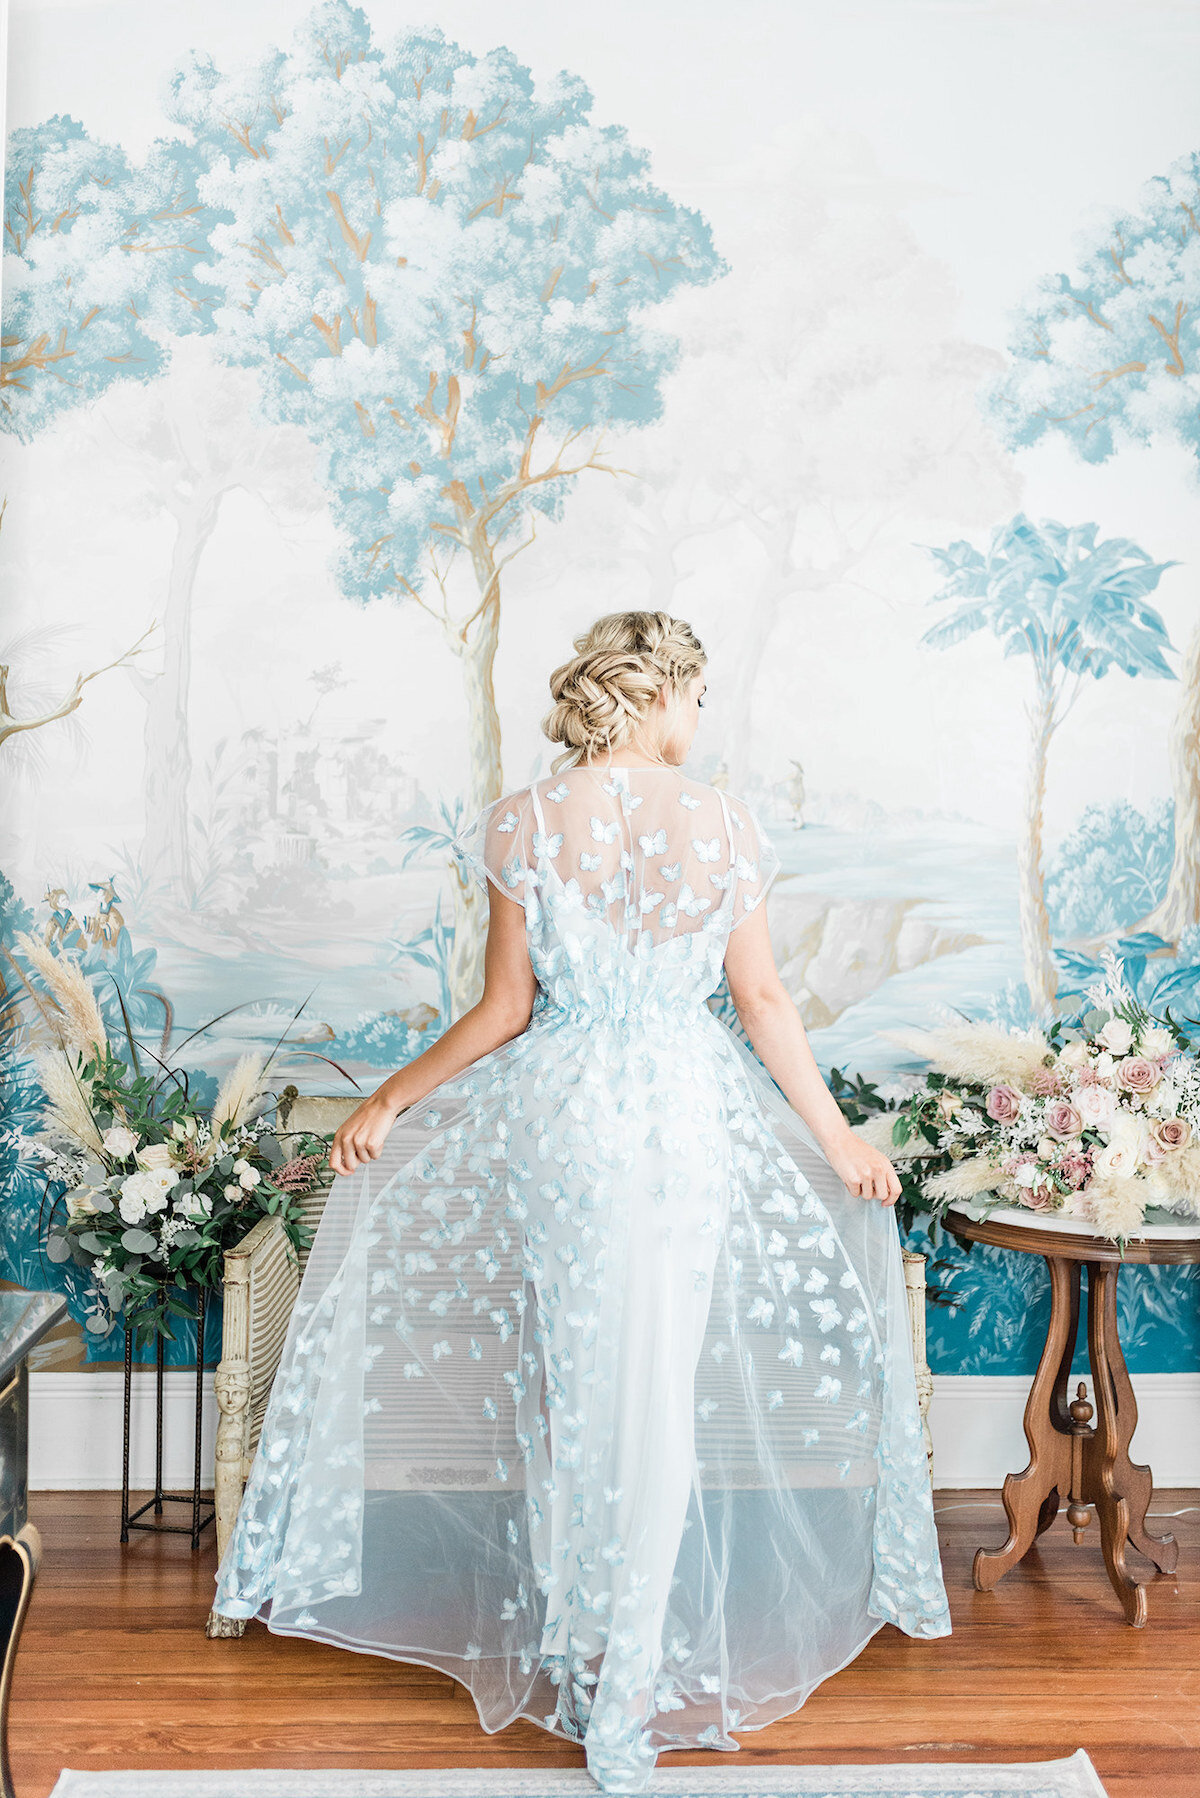 Discover the magic of couture bridal photography with a high-end touch. Our images fashion dreams into reality, portraying the beauty and craftsmanship of each bridal masterpiece.